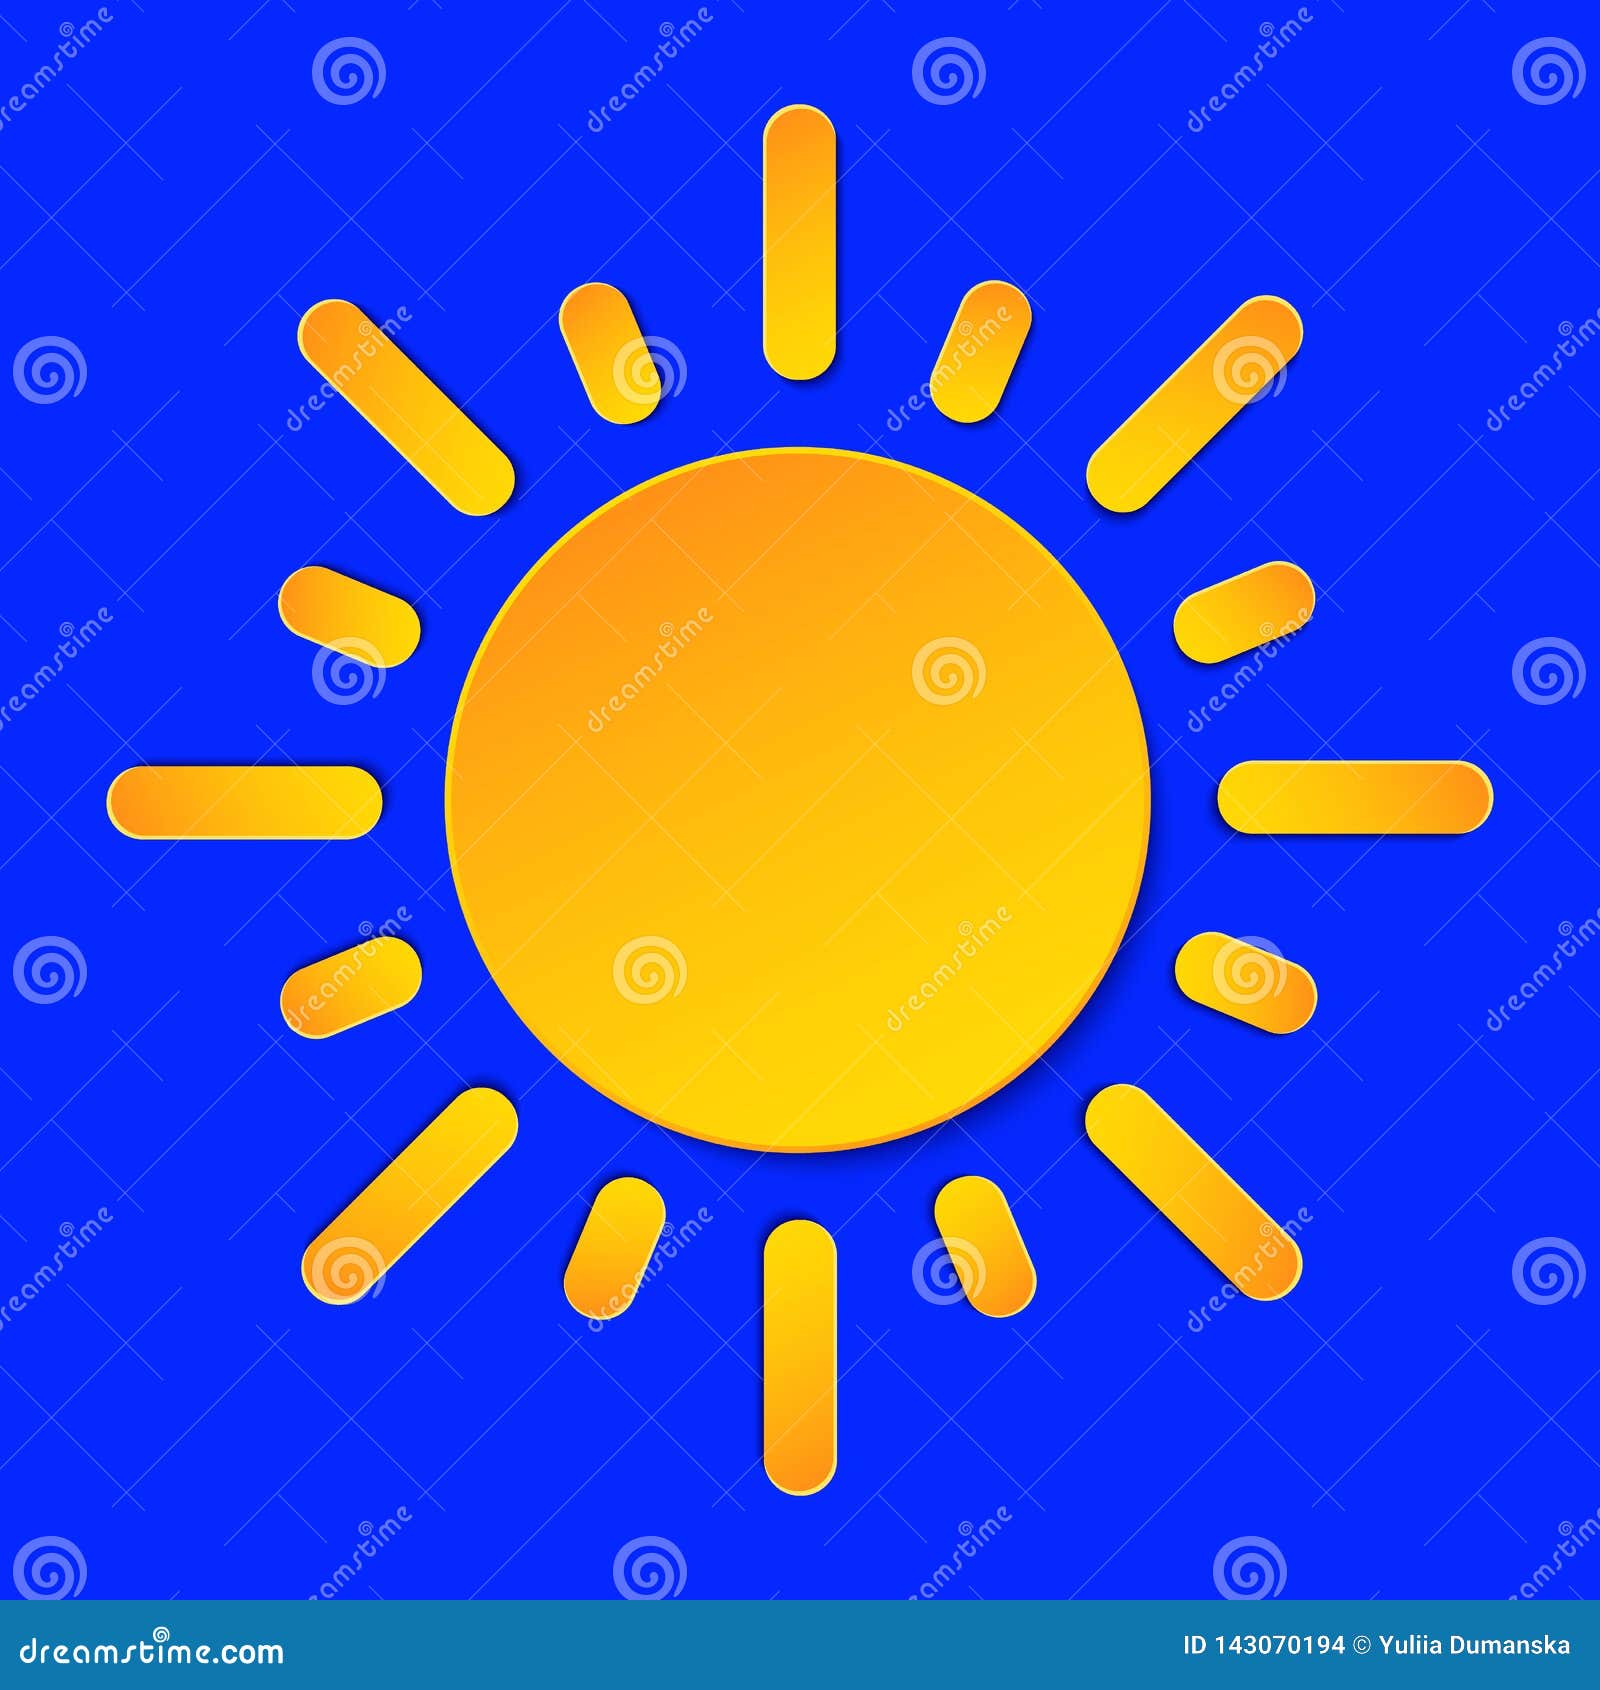 Sunny Day Weather Forecast Info Icon. Yellow Sun Symbol Paper Cut